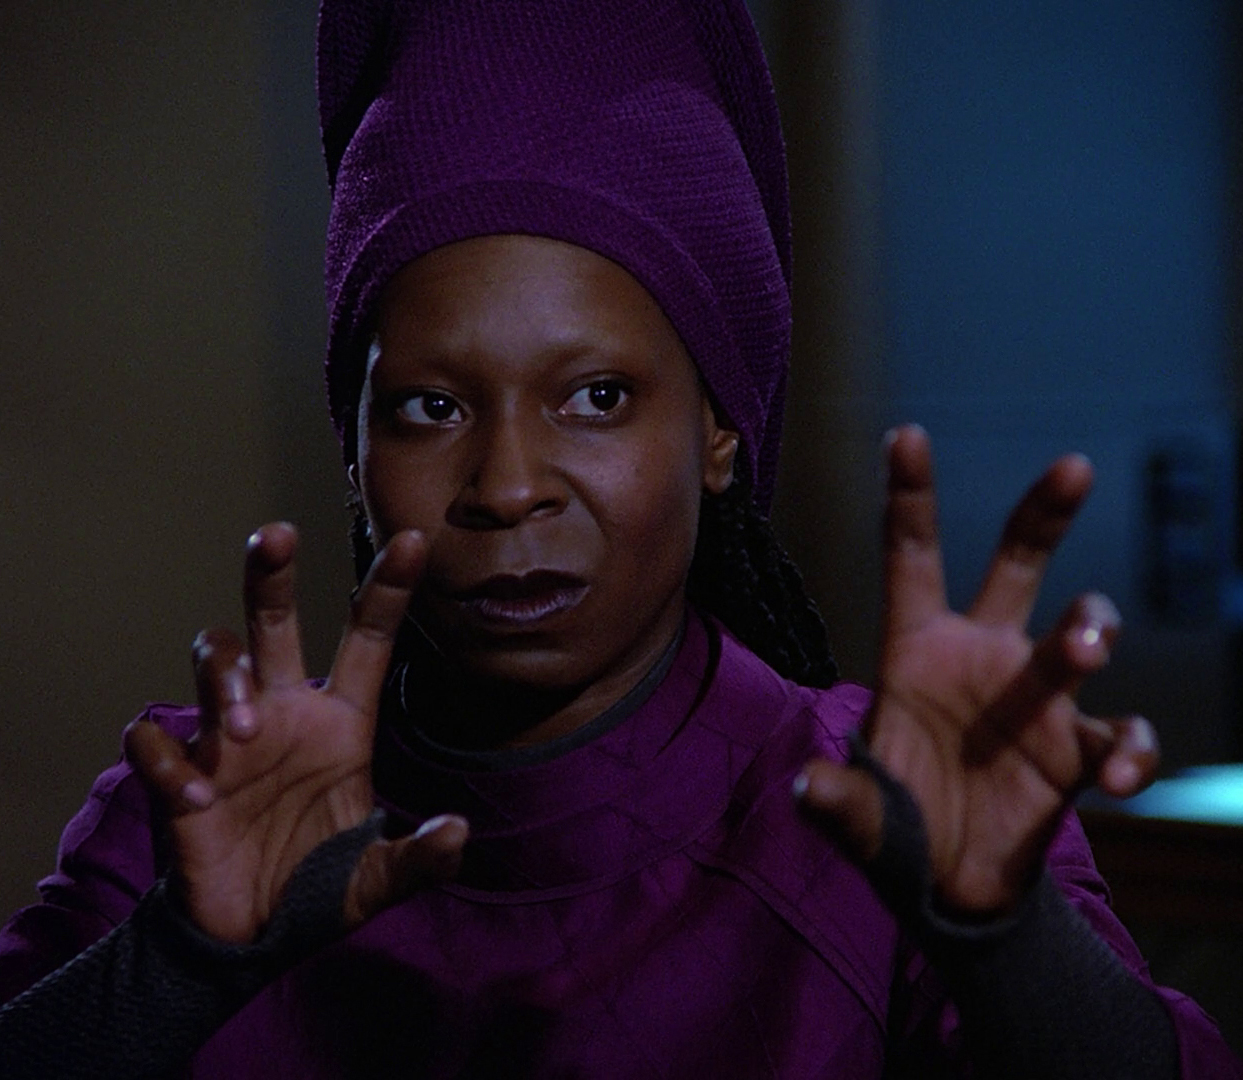 Star Trek TNG: Guinan. This character ranks #1 for all eternity for good reason. 1. It's Whoopi Goldberg, a living hemorrhoid. 2. The ship already has Deanna Troi as an empath. 3. A smug, smart-mouthed bartender? The ship has a replicator! --"Earl Grey, hot." They could have beamed her into deep space, and the staff would sip their synthehol drinks, never mention her name but give each other knowing/approving stares.